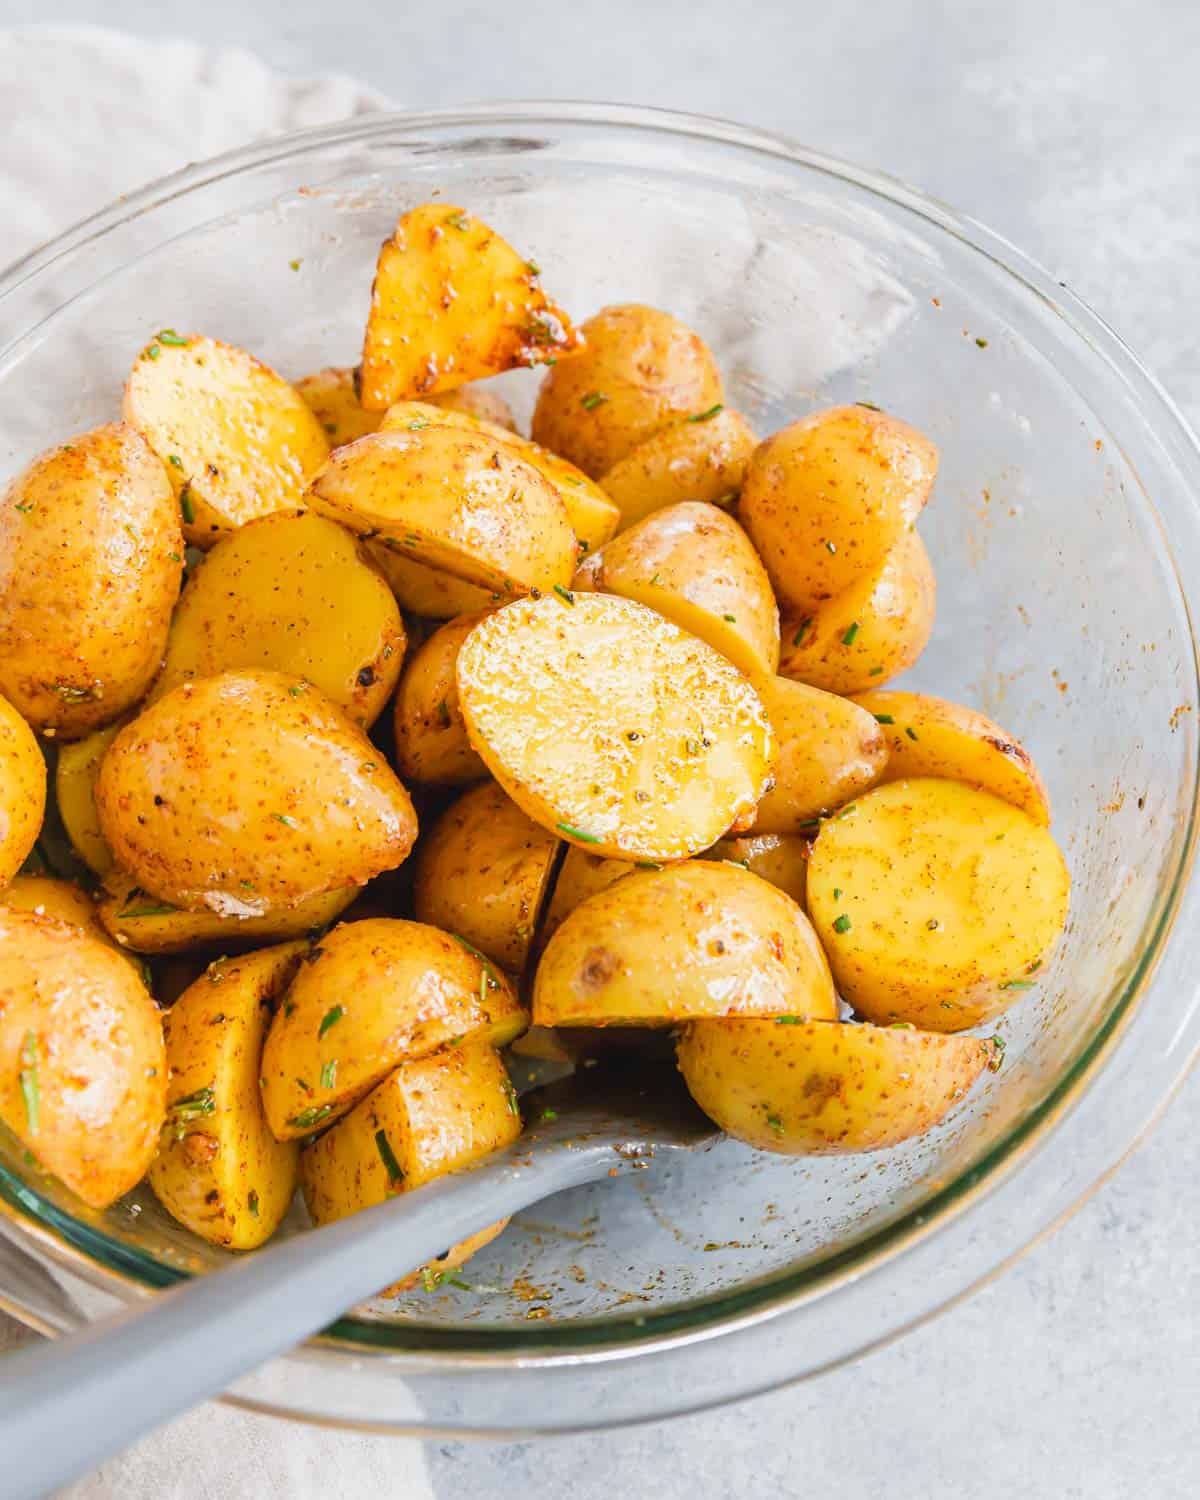 Tossing halved baby potatoes with oil and spices in a glass bowl.